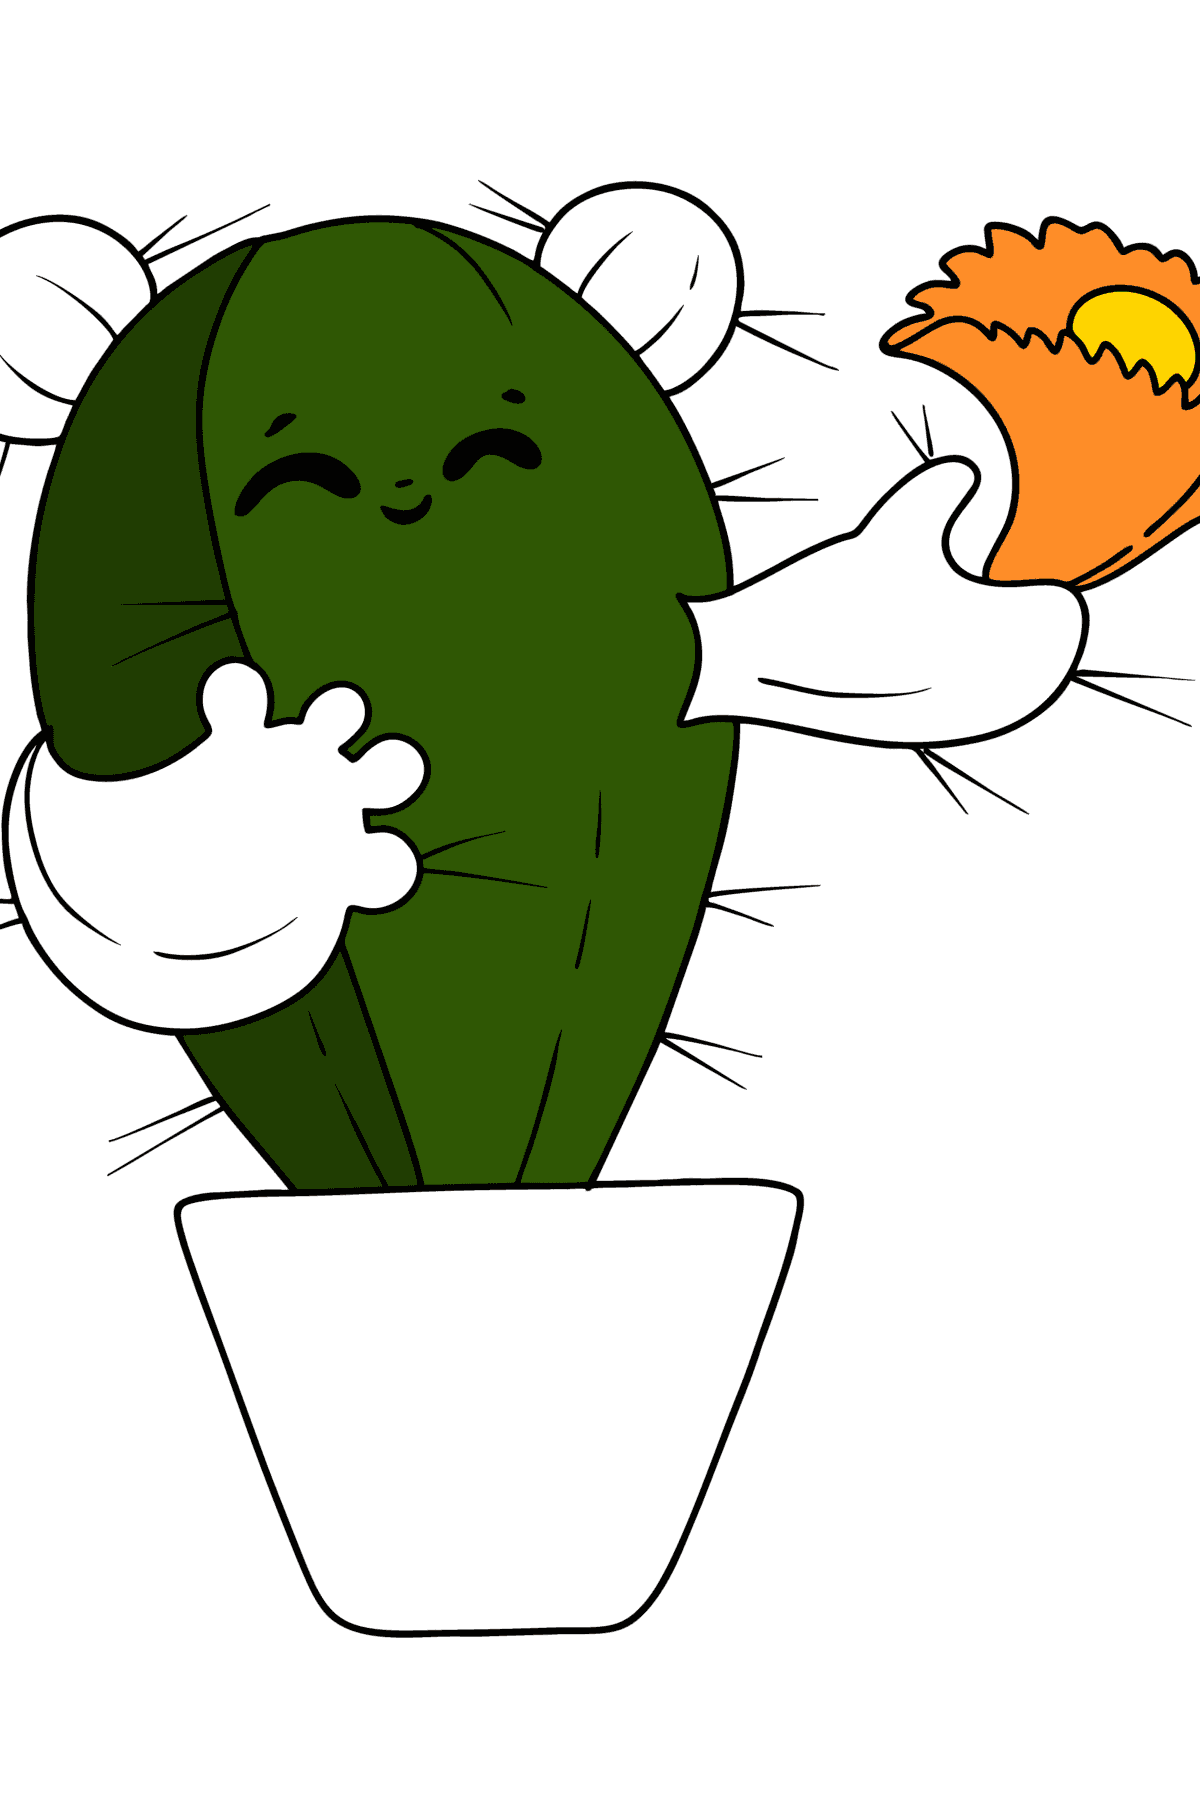 Adorable Cactus coloring page - Coloring Pages for Kids